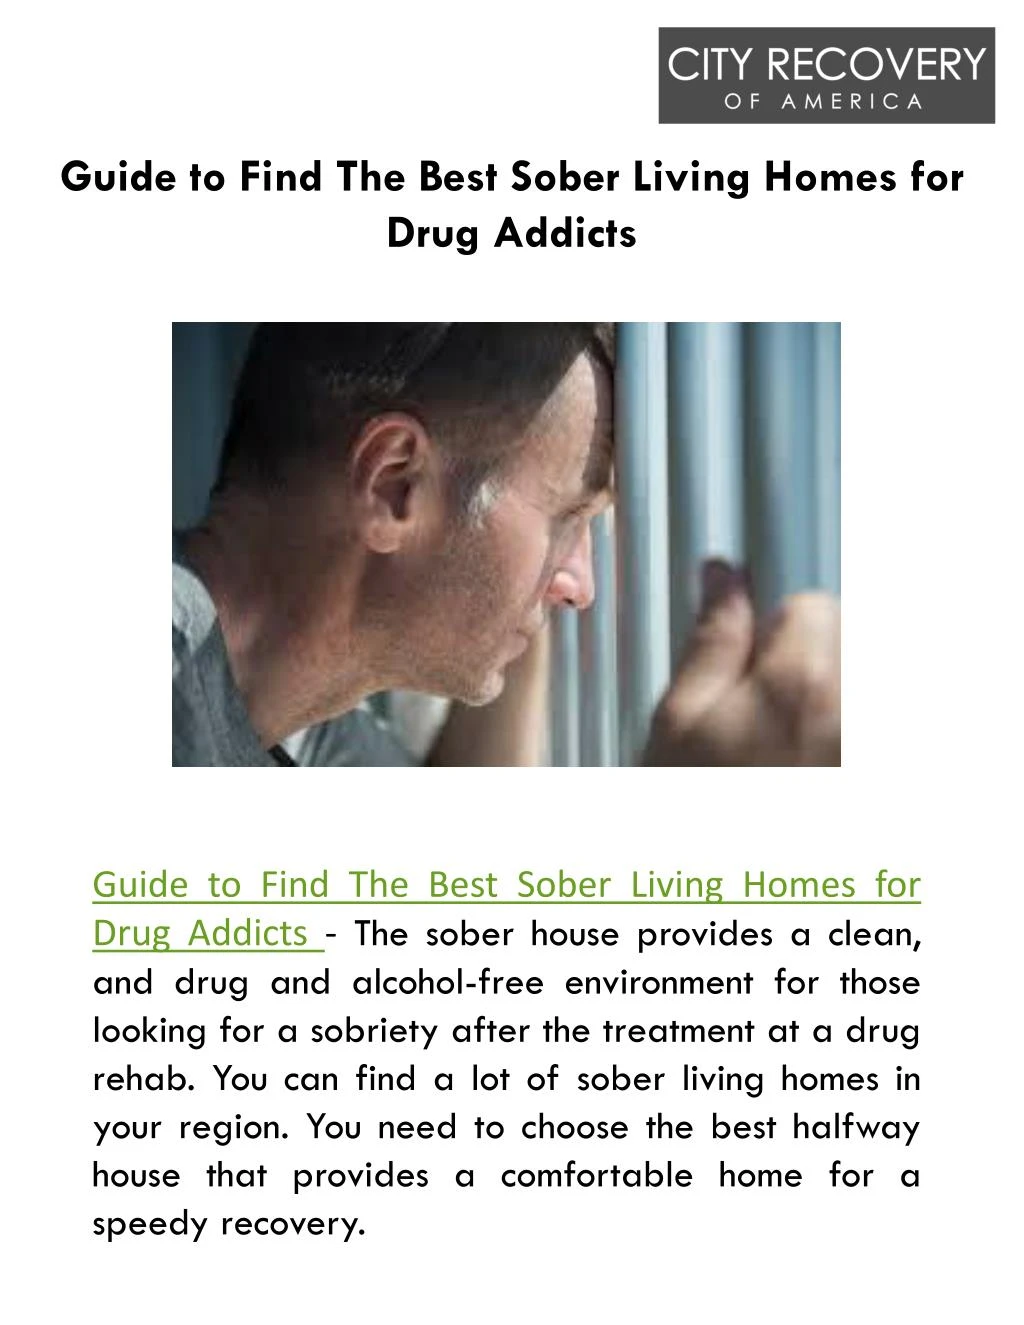 guide to find the best sober living homes